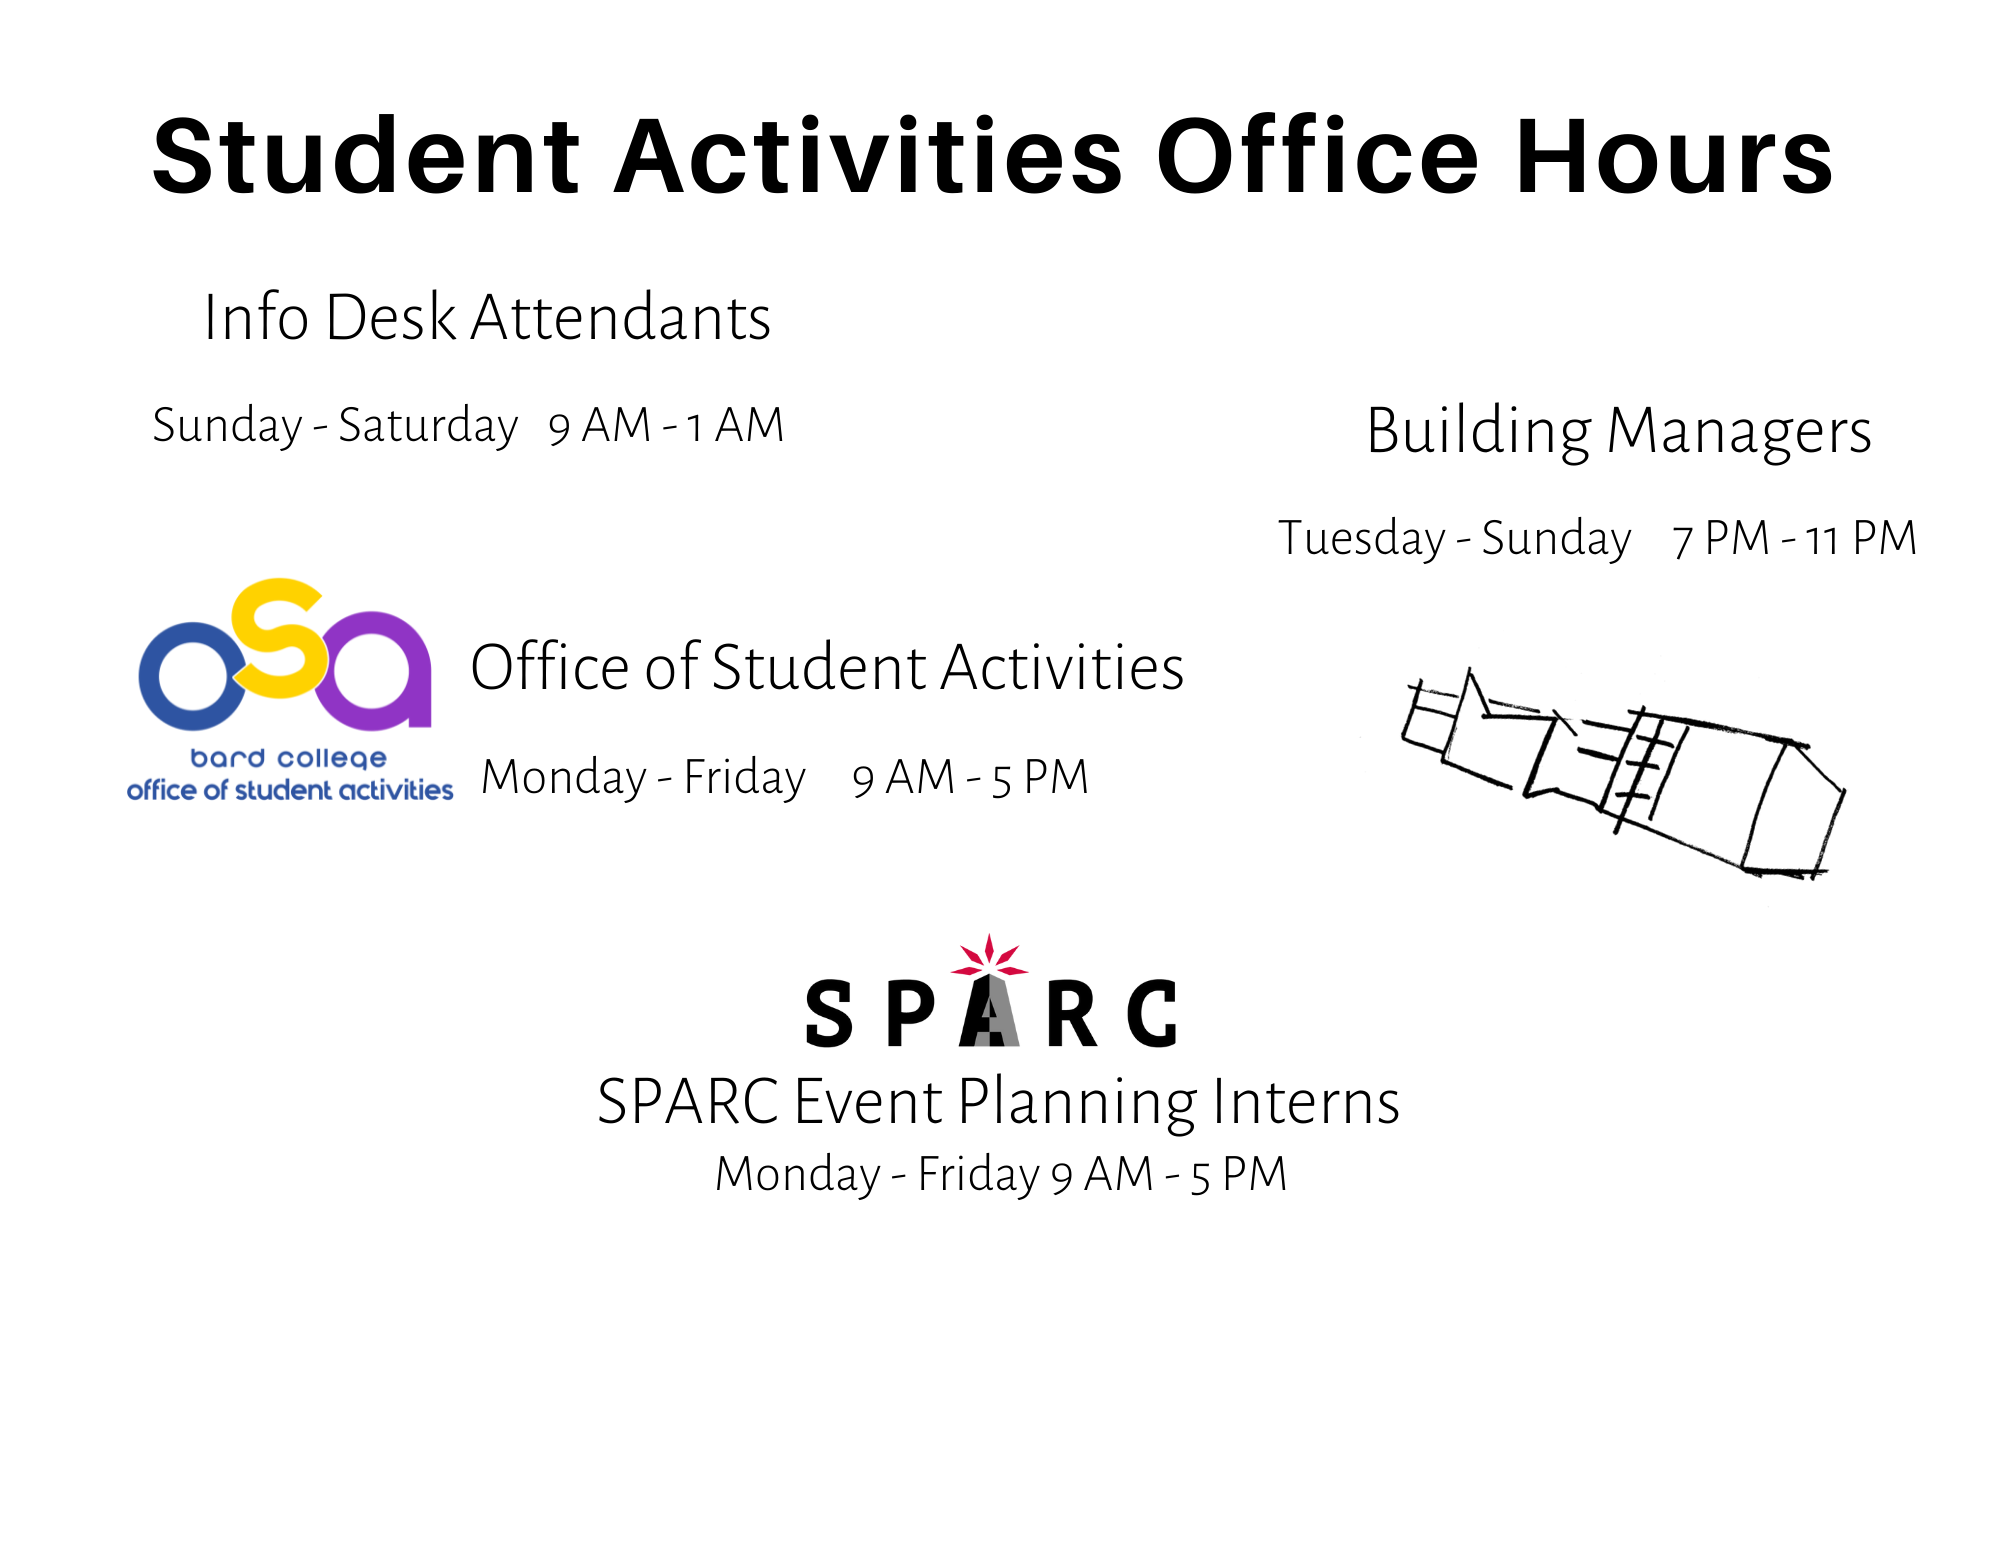 OSA and Campus Center Hours